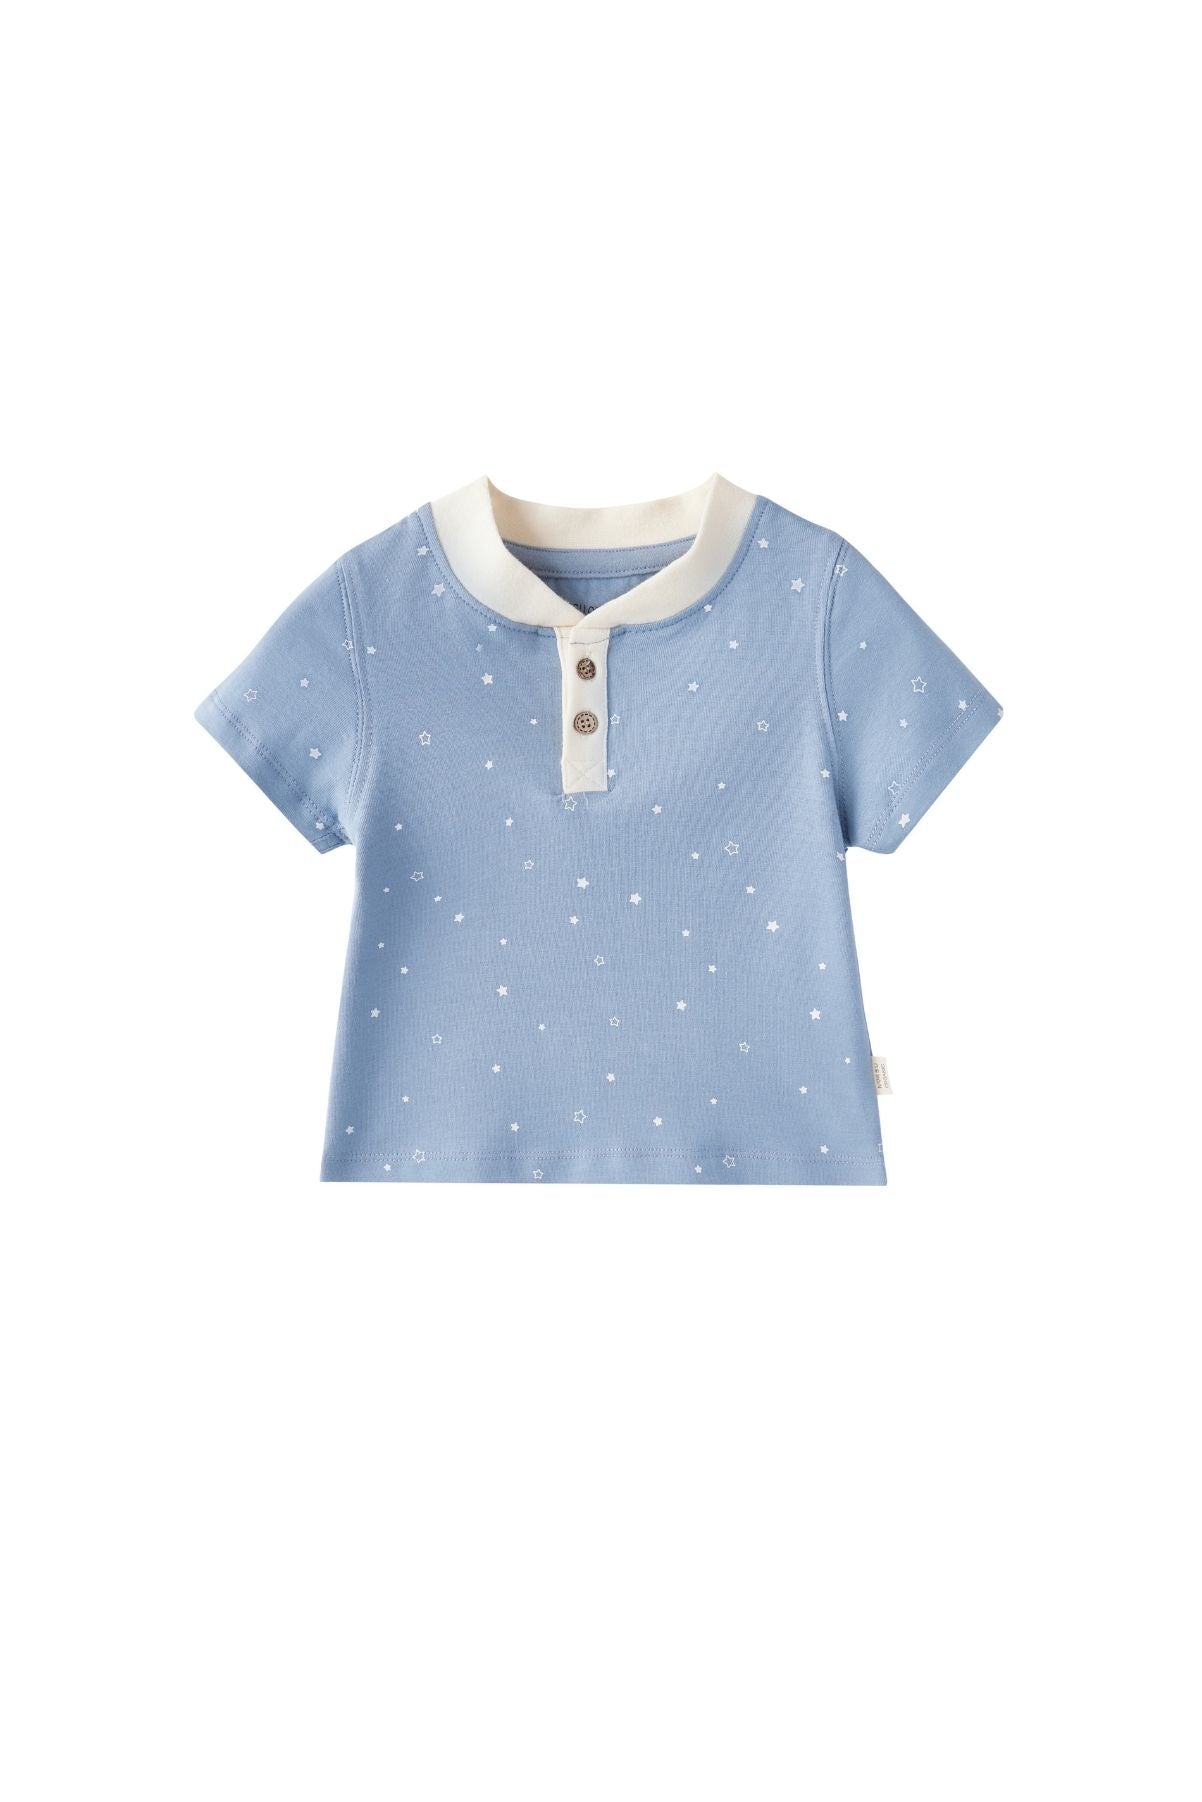 image for Baby Organic Cotton T-shirt-Blue Starry